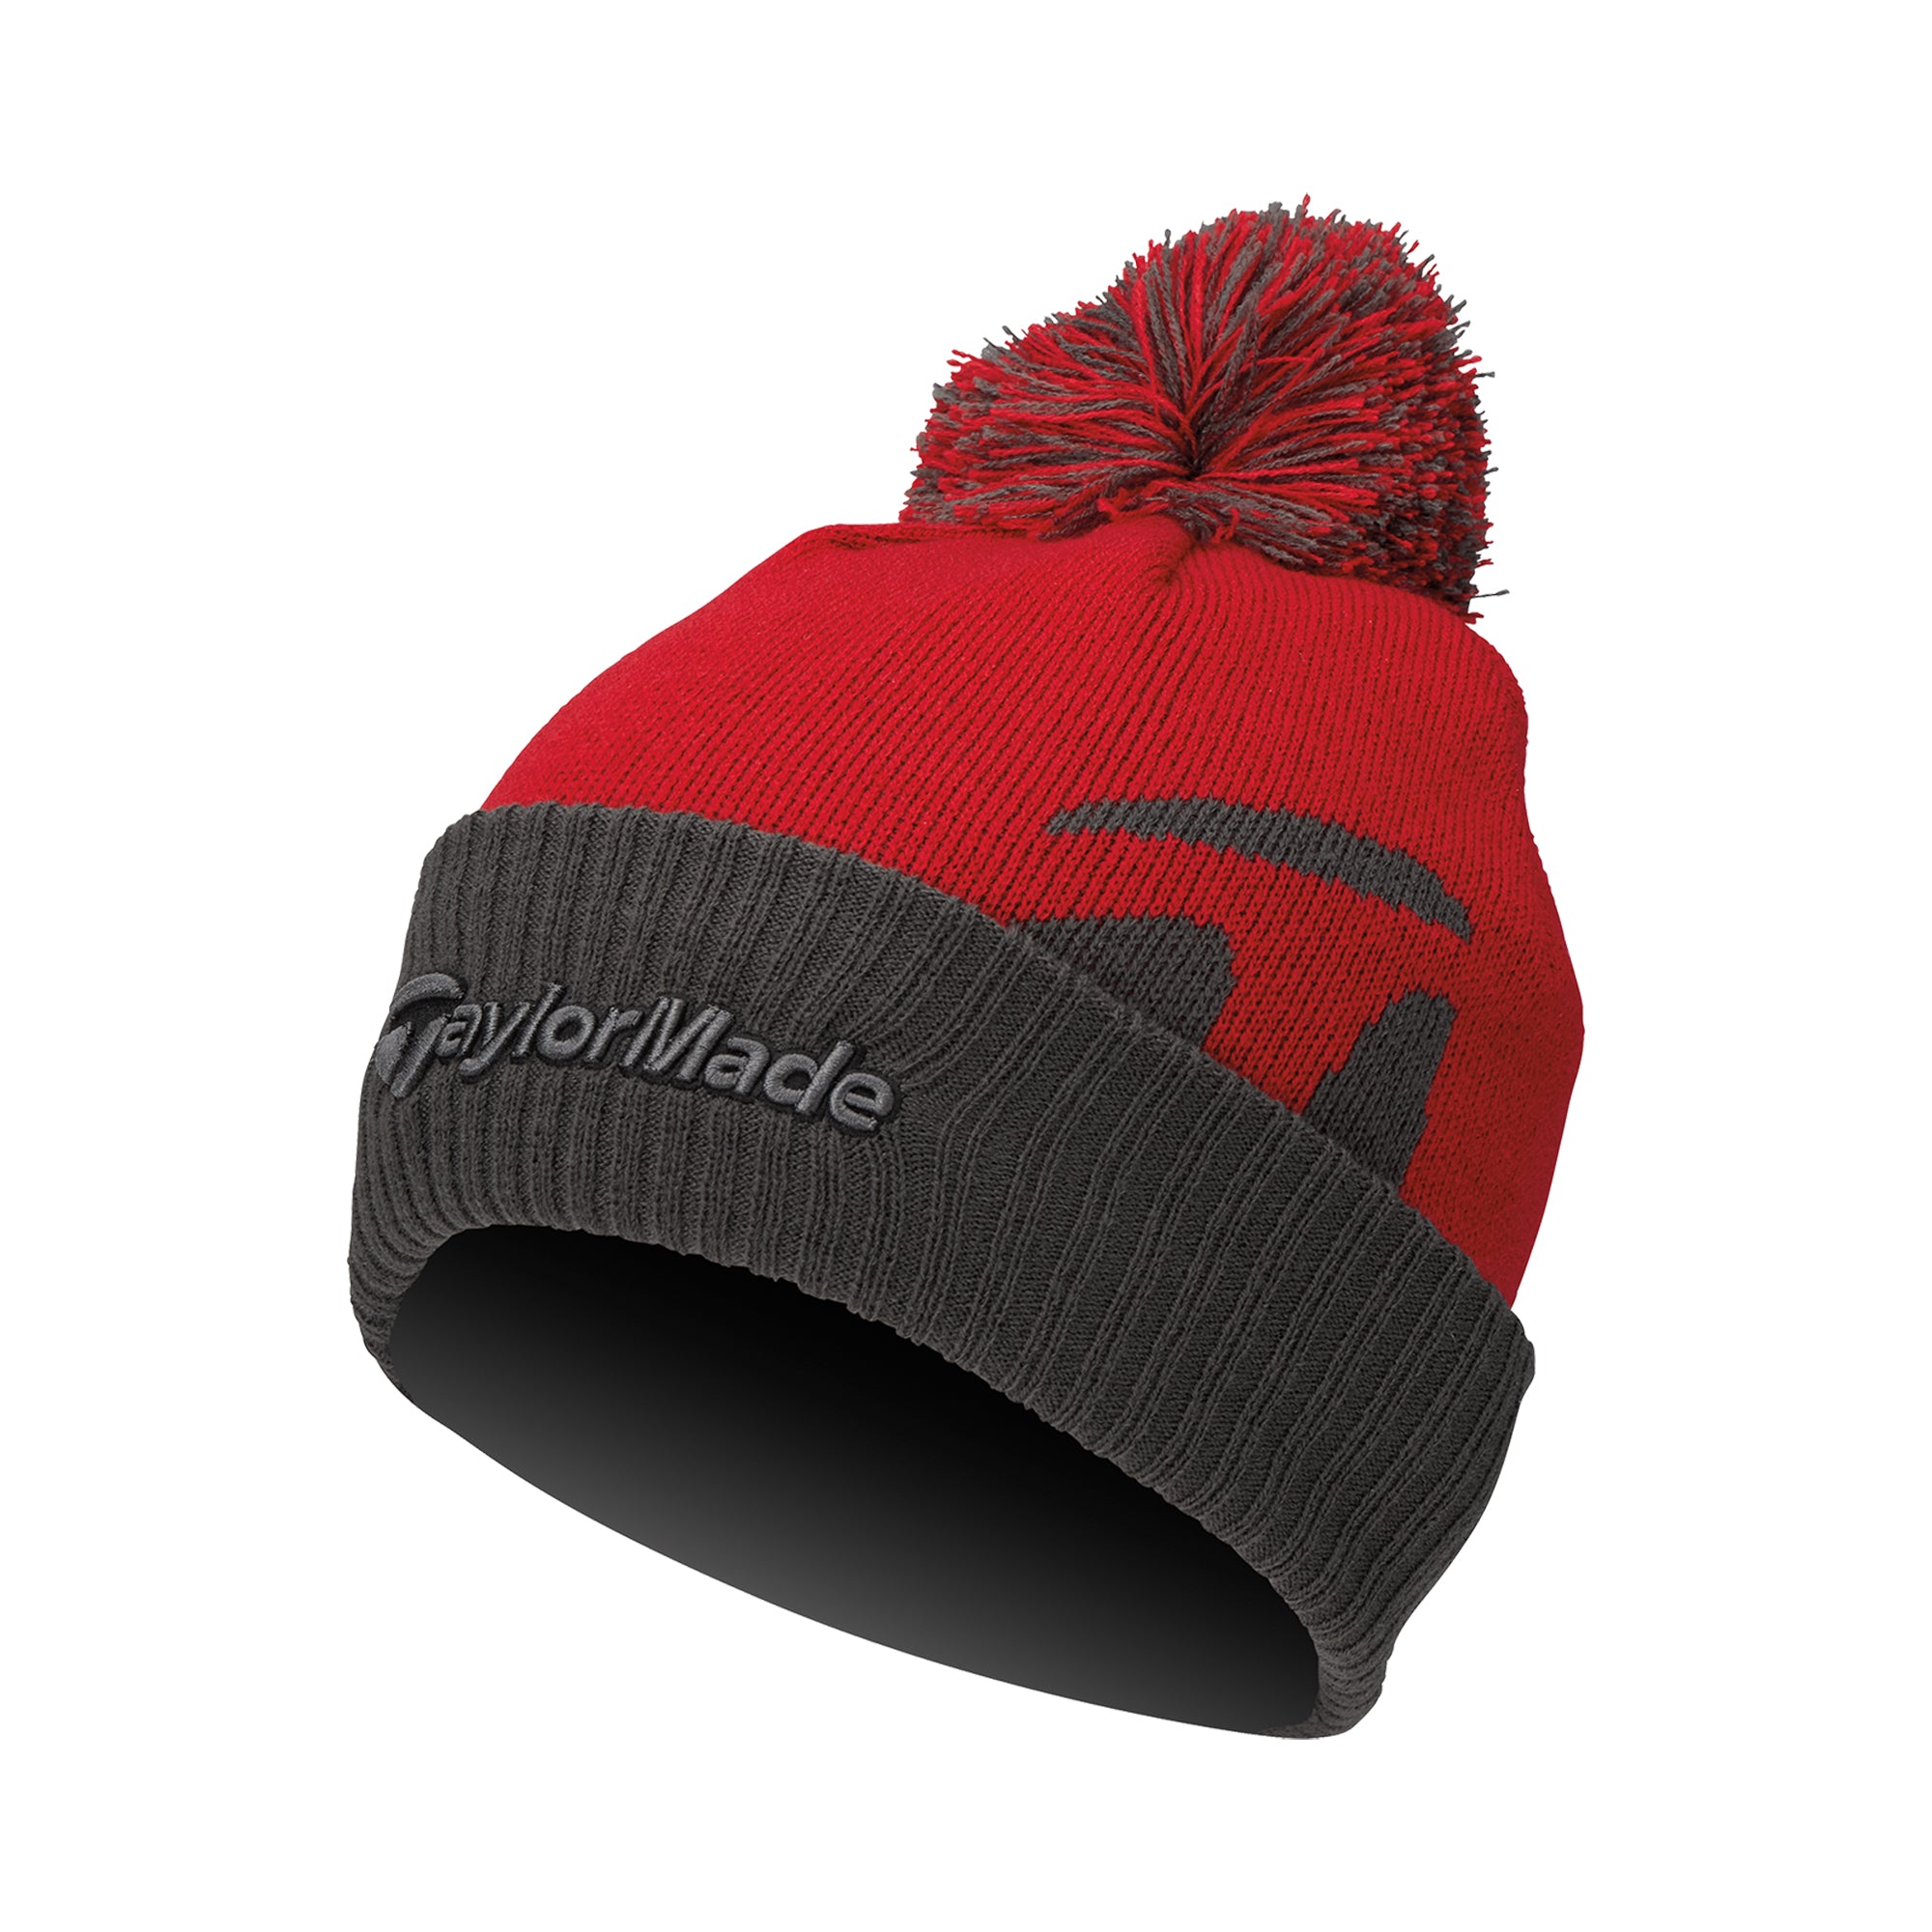 taylormade-golf-bobble-beanie-hat-v97811-red